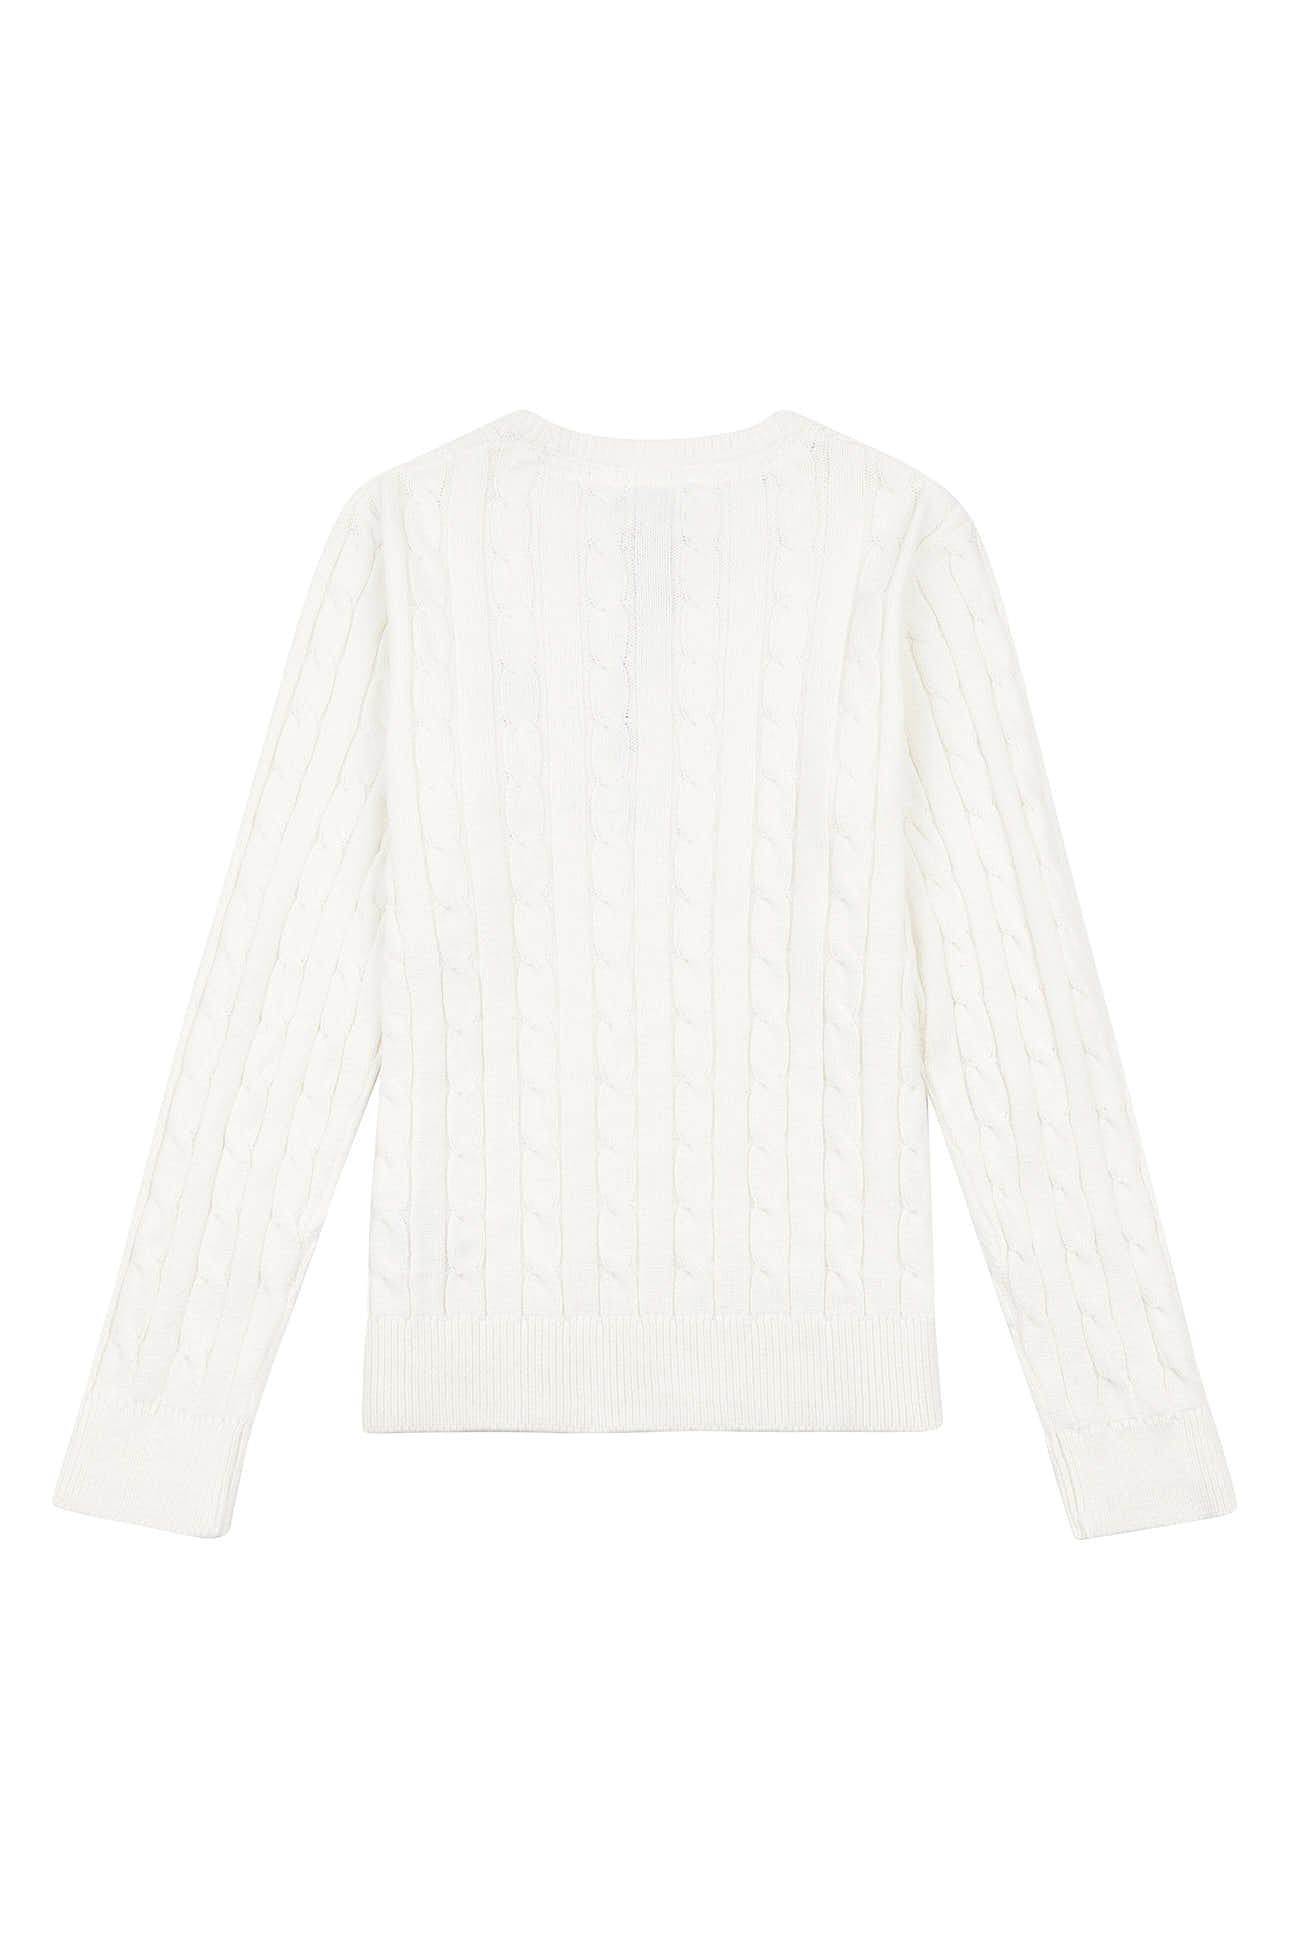 Boys Cable Knit Jumper in Marshmallow